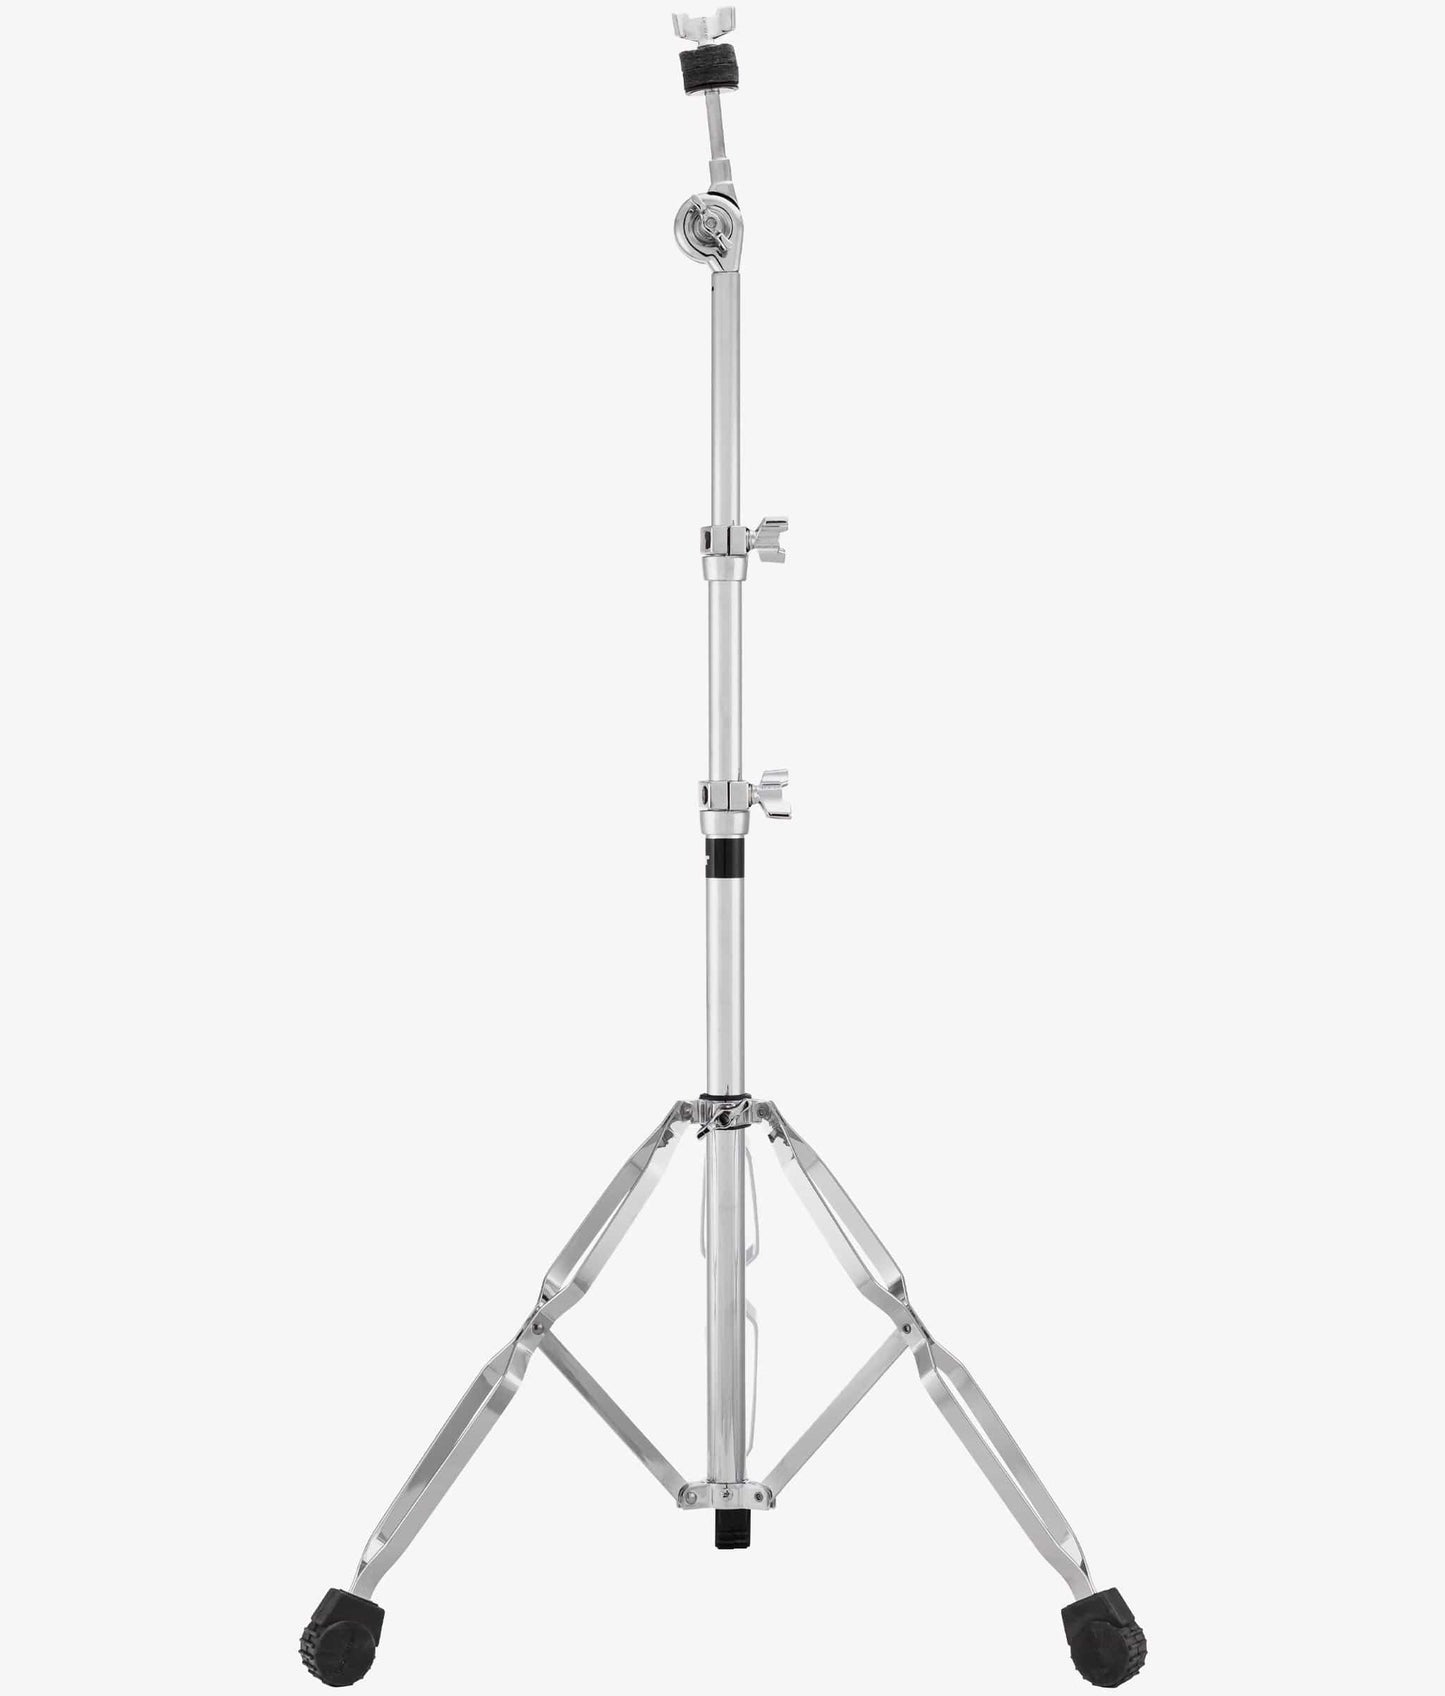  Gibraltar 5710 Medium Weight Cymbal Stand cymbal stand